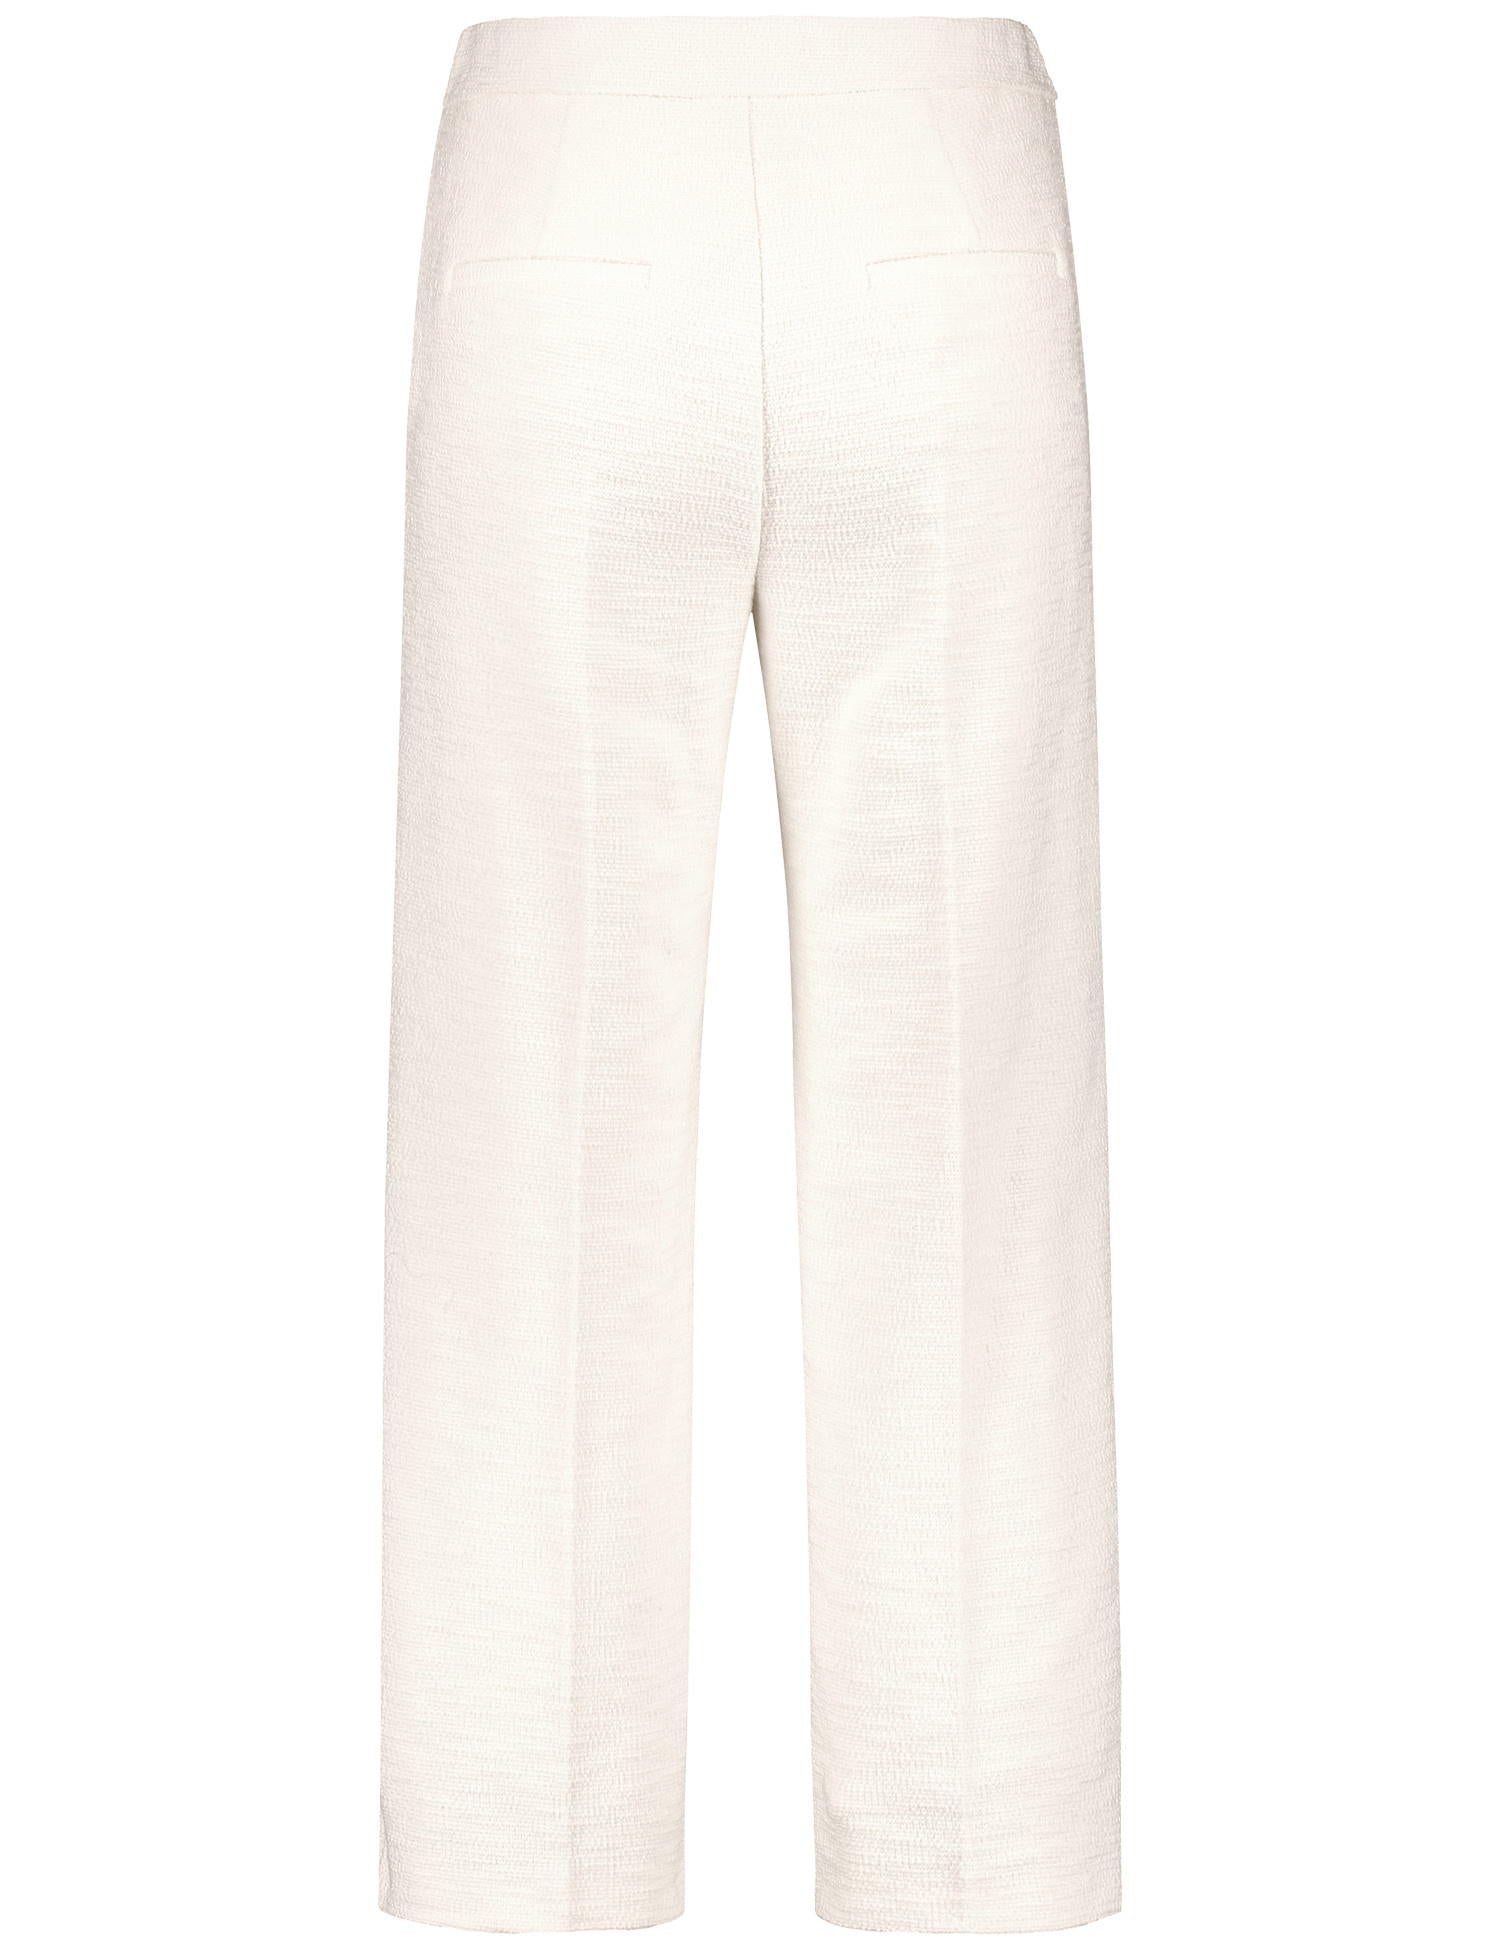 Comfortable Pull-On Trousers_320019-31266_90118_03